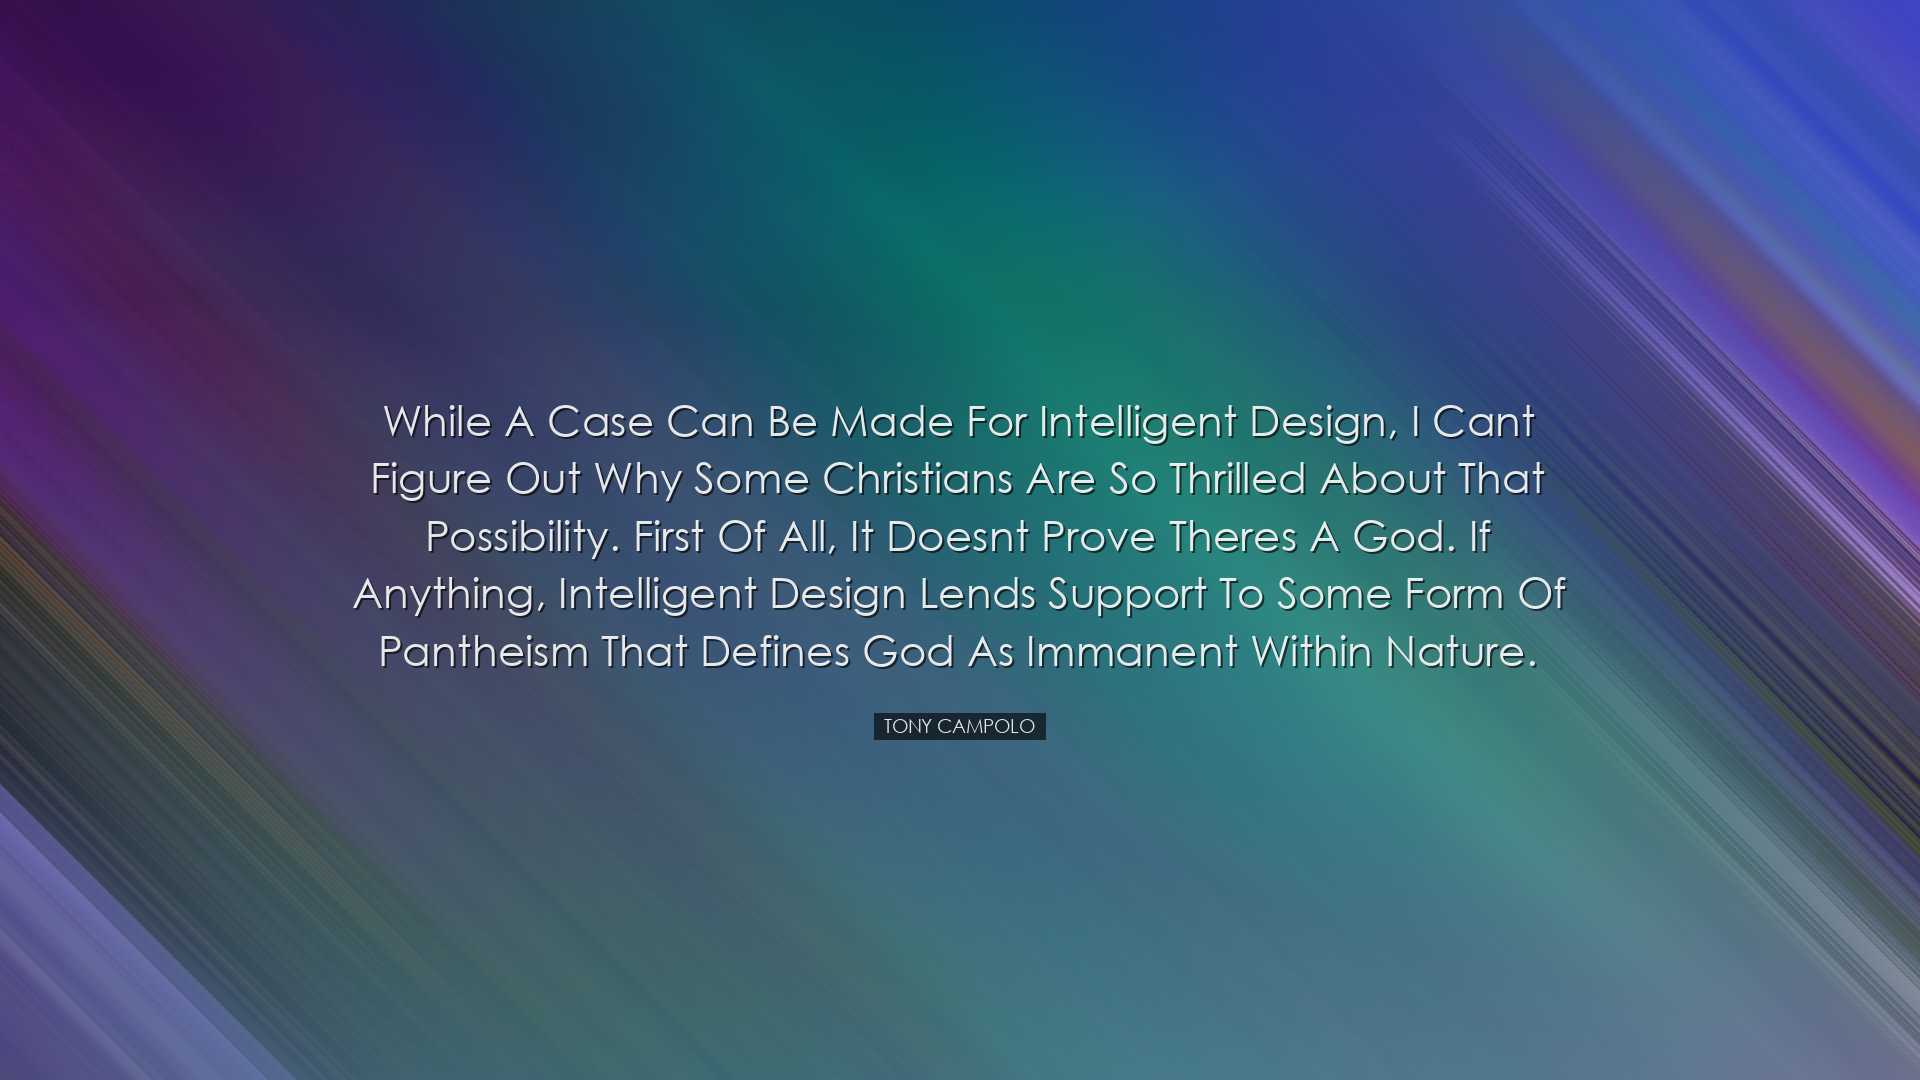 While a case can be made for intelligent design, I cant figure out